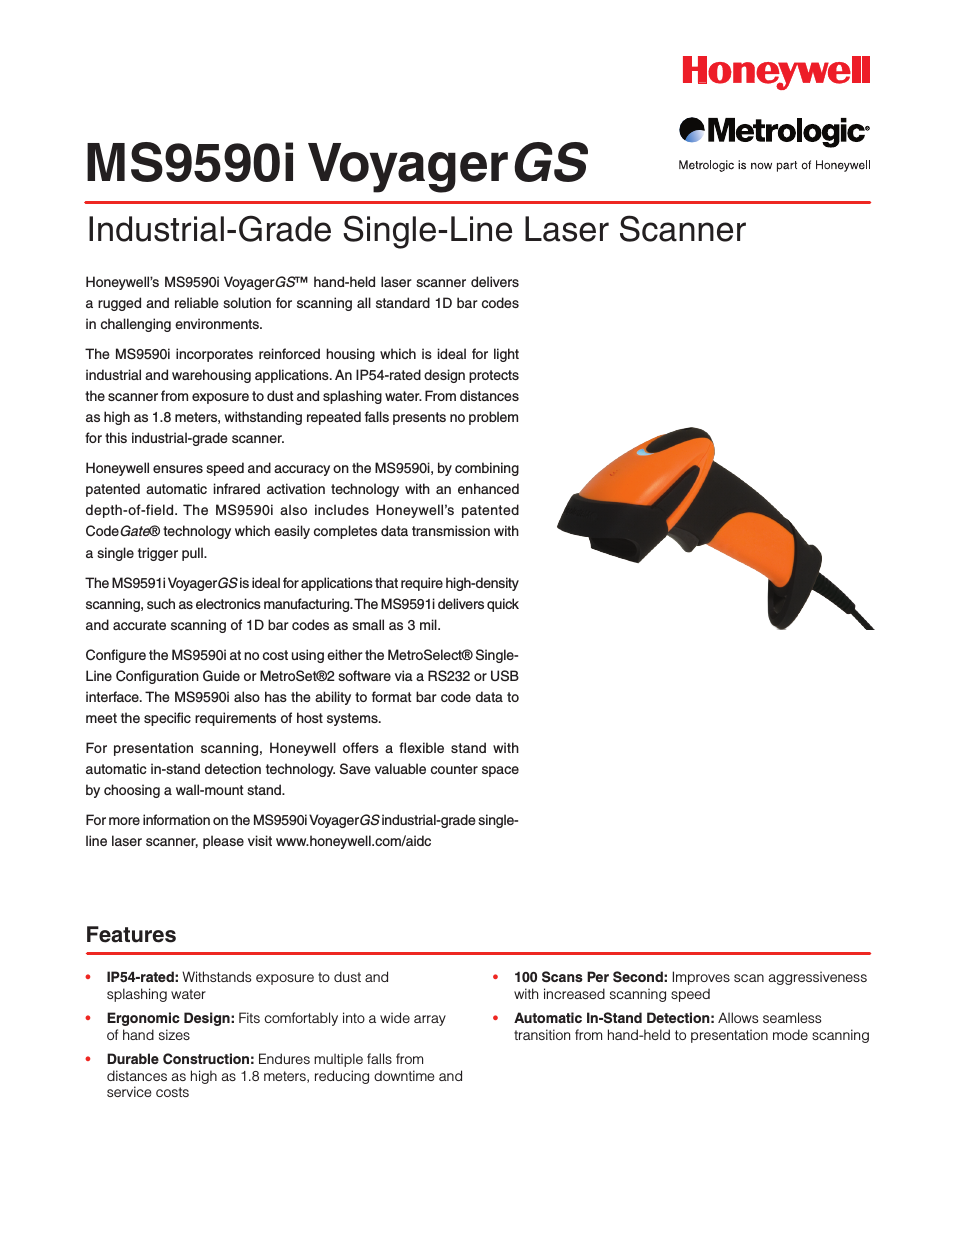 VoyagerGS MS9590i